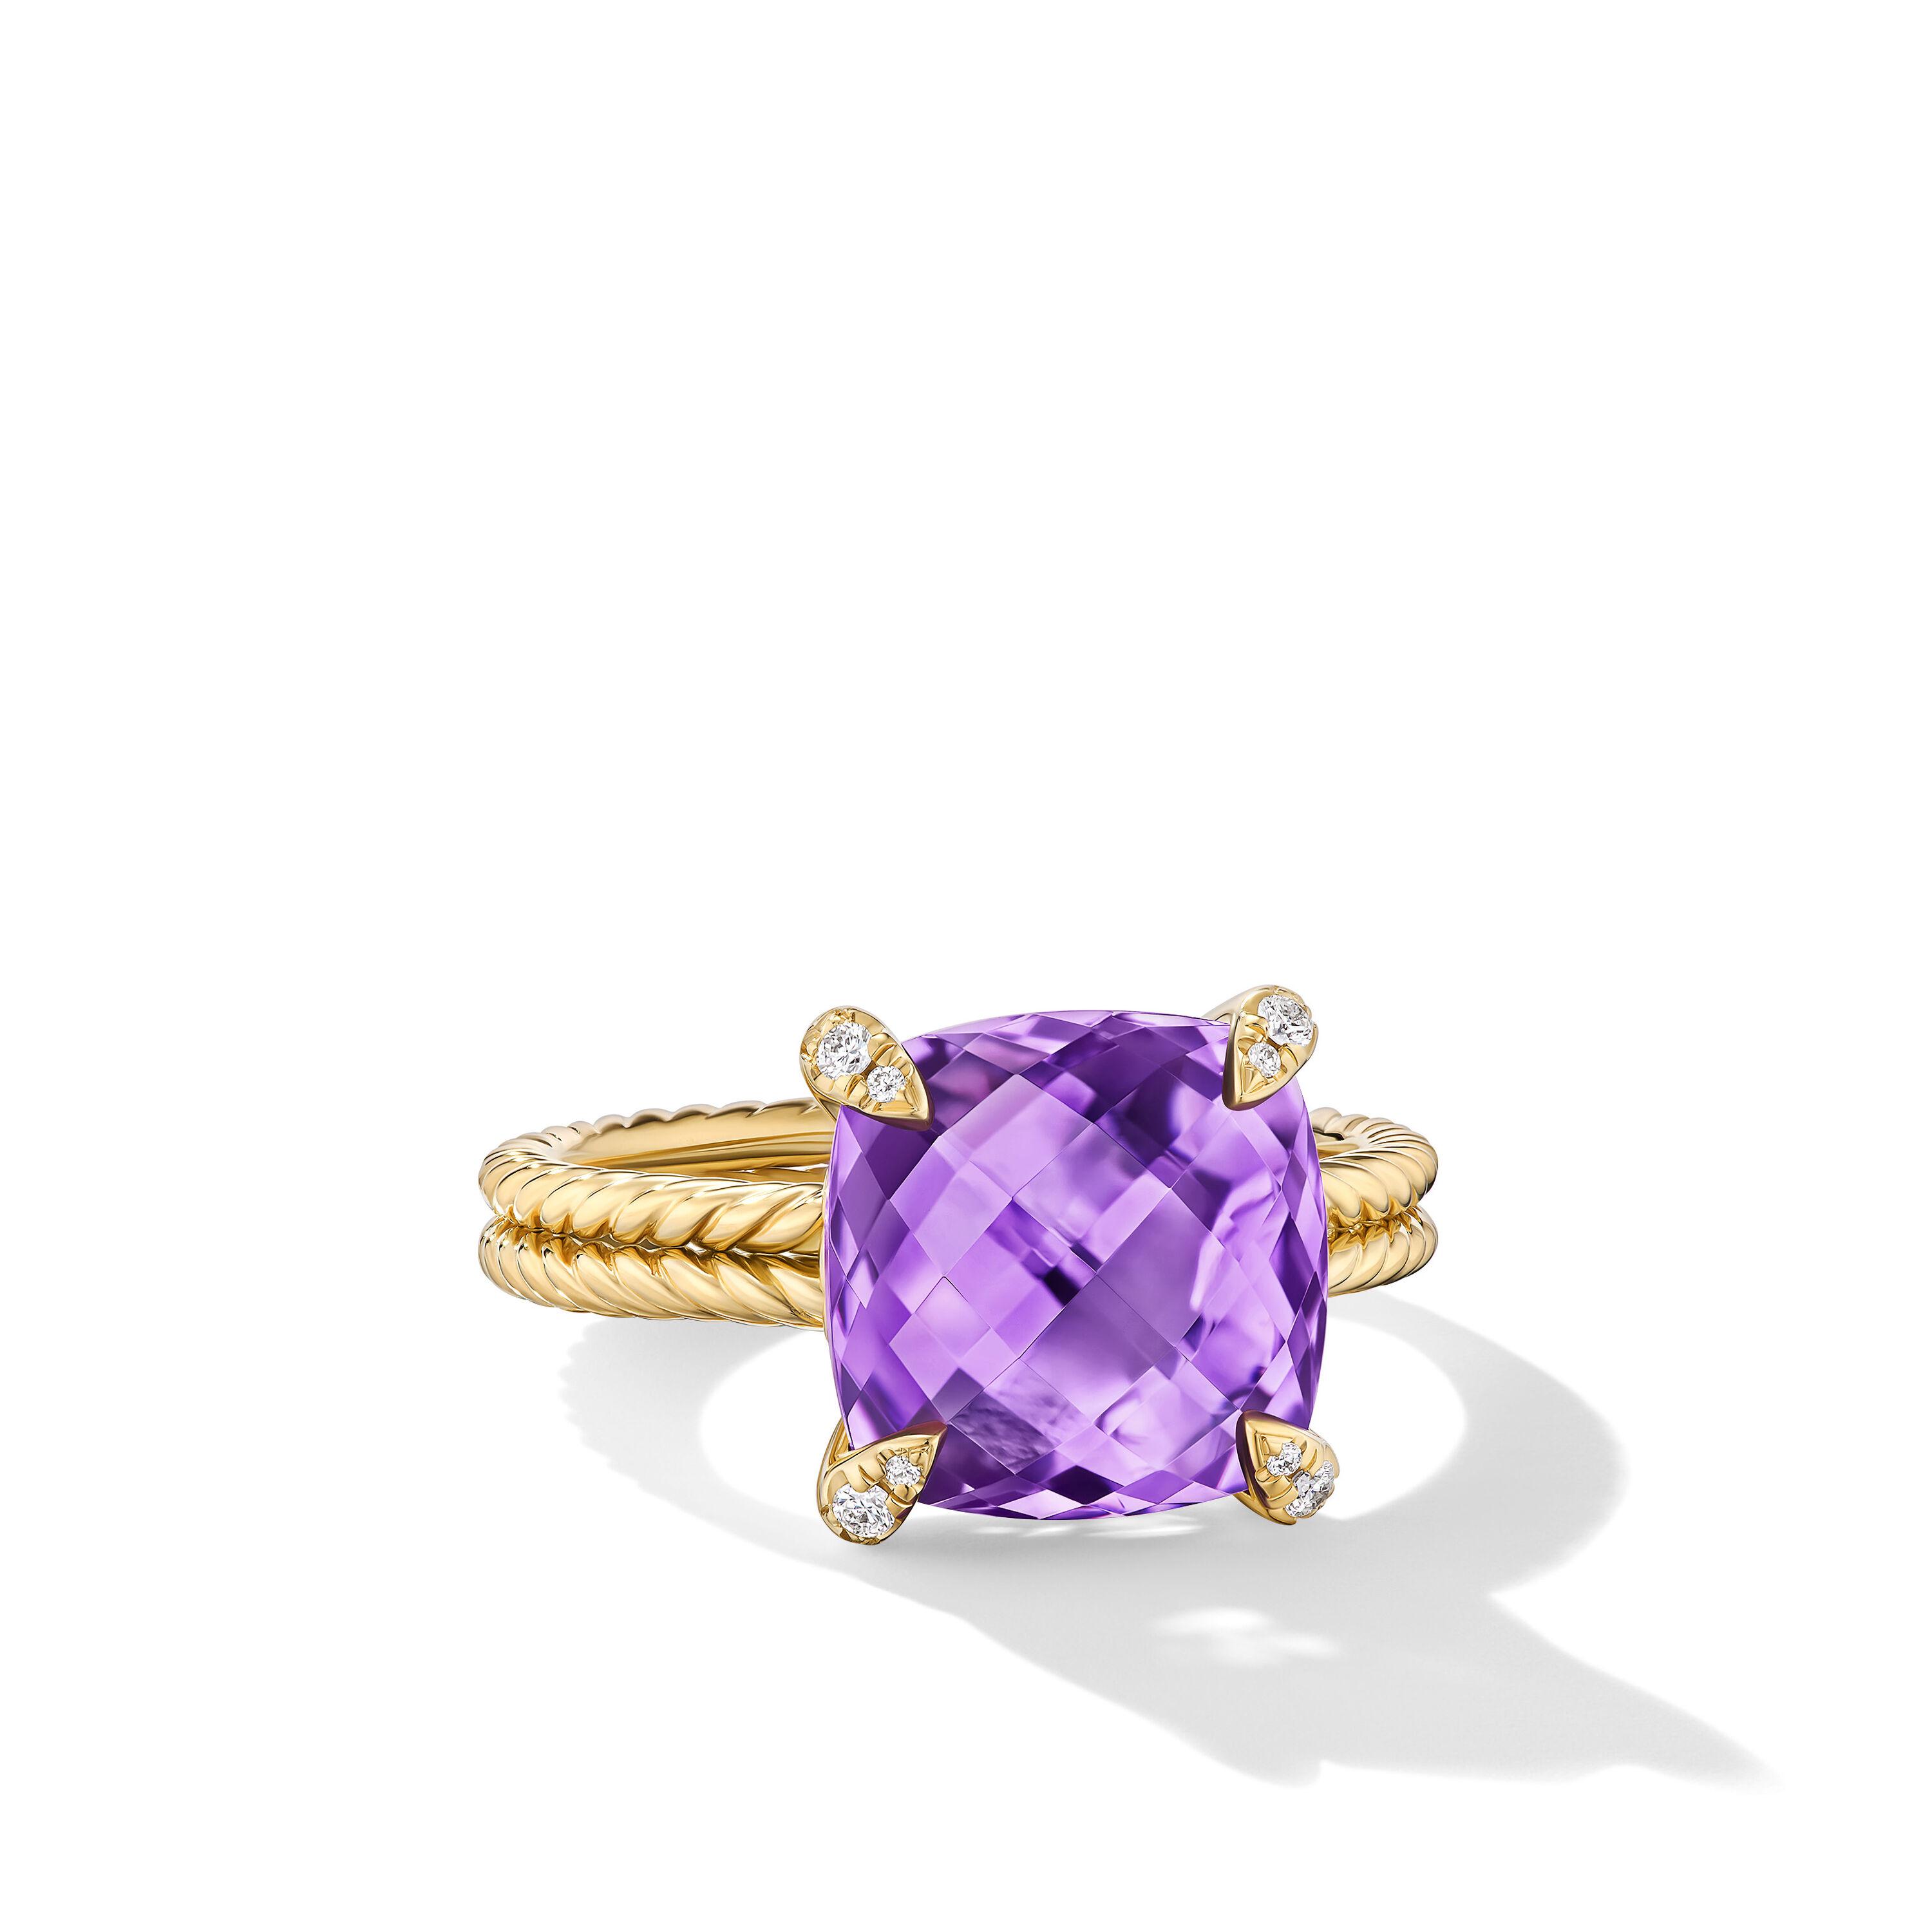 David Yurman Chatelaine Ring in 18K Yellow Gold with Amethyst and Diamonds